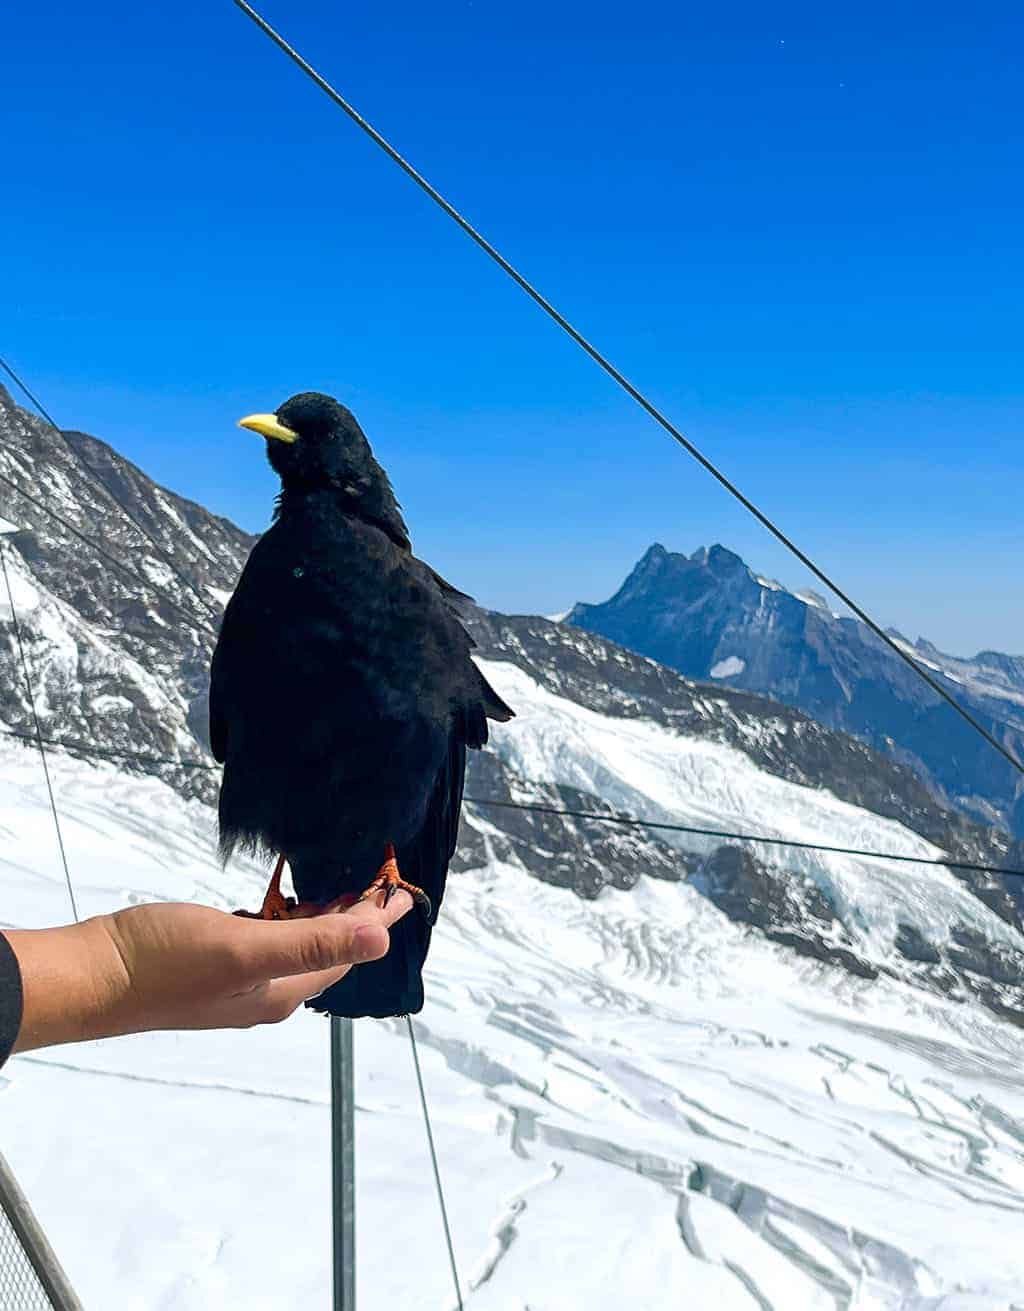 Crows eating seeds out of someone's hand Jungfraujoch – Top of Europe Adventure – stunning mountain peak and glacier views from the top of the Sphinx Observatory